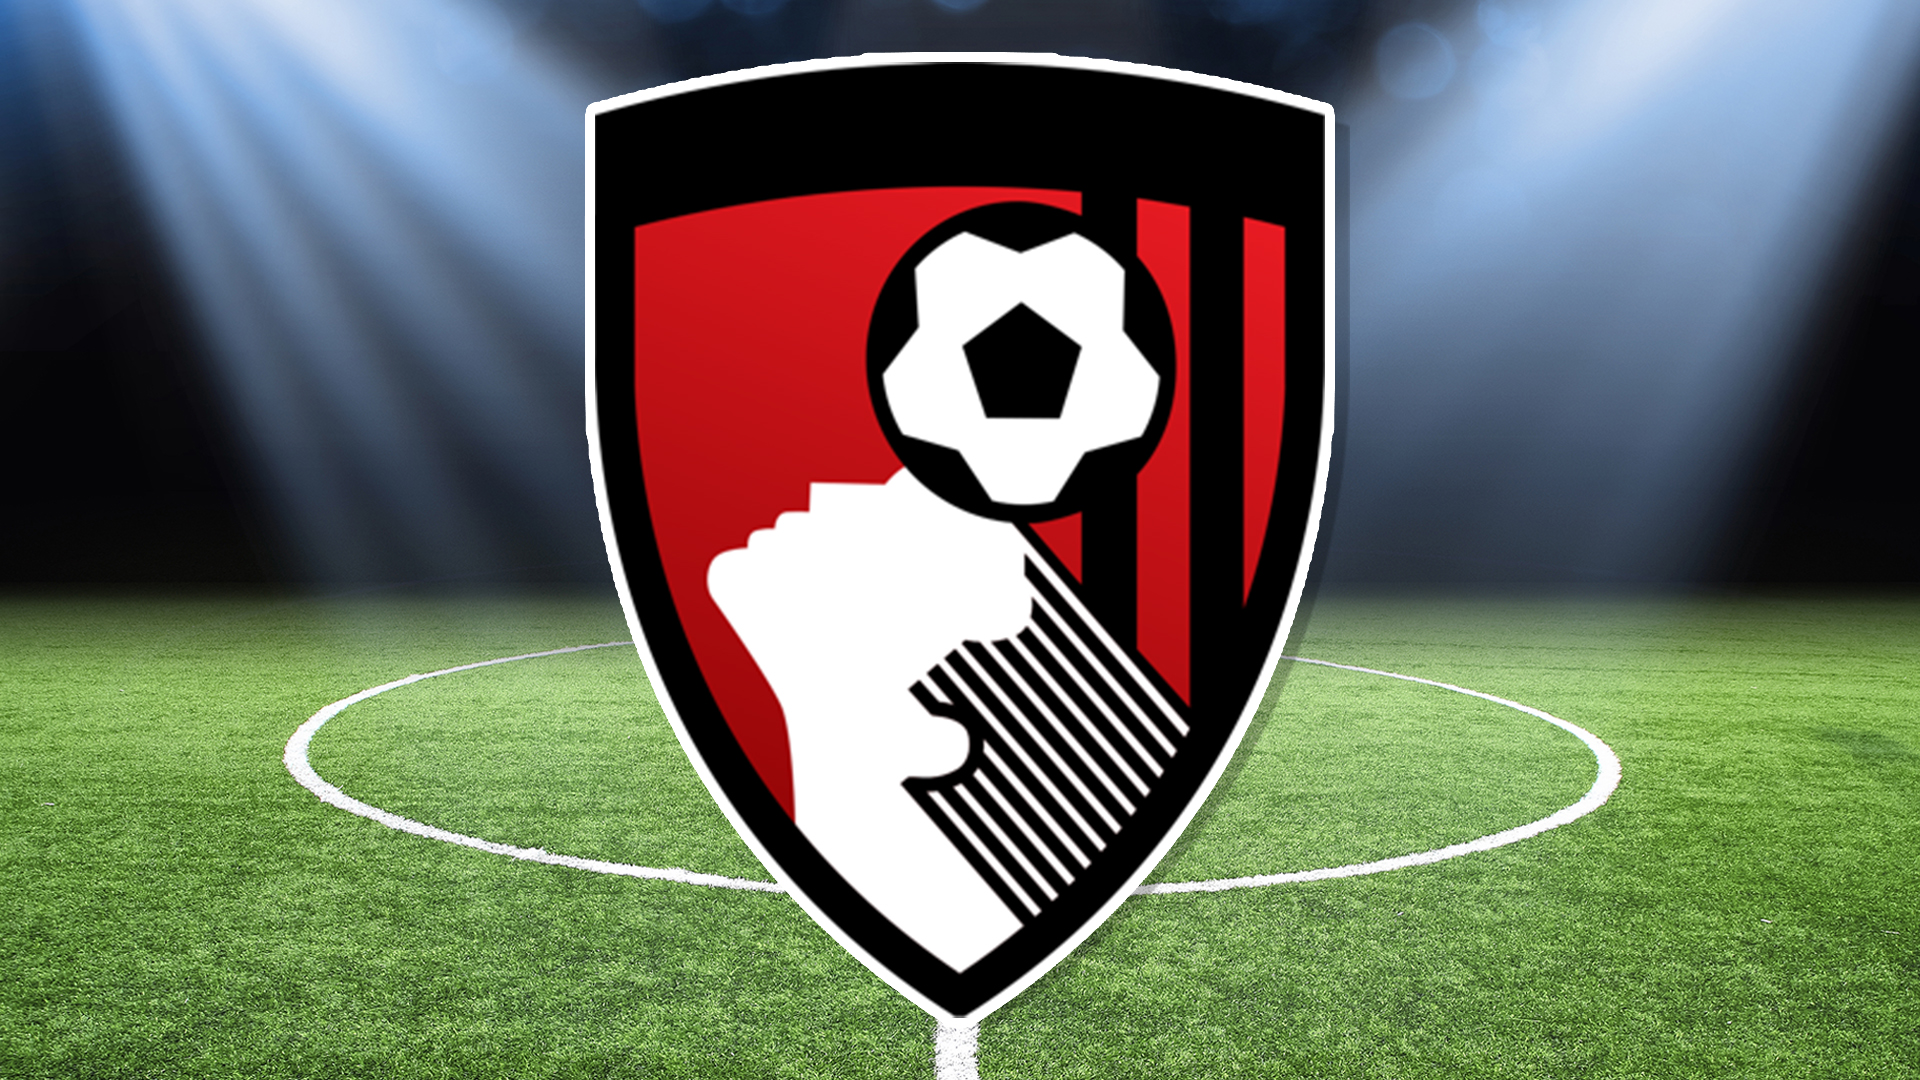 Football Quiz - Can You Guess The Football Club Badge? 